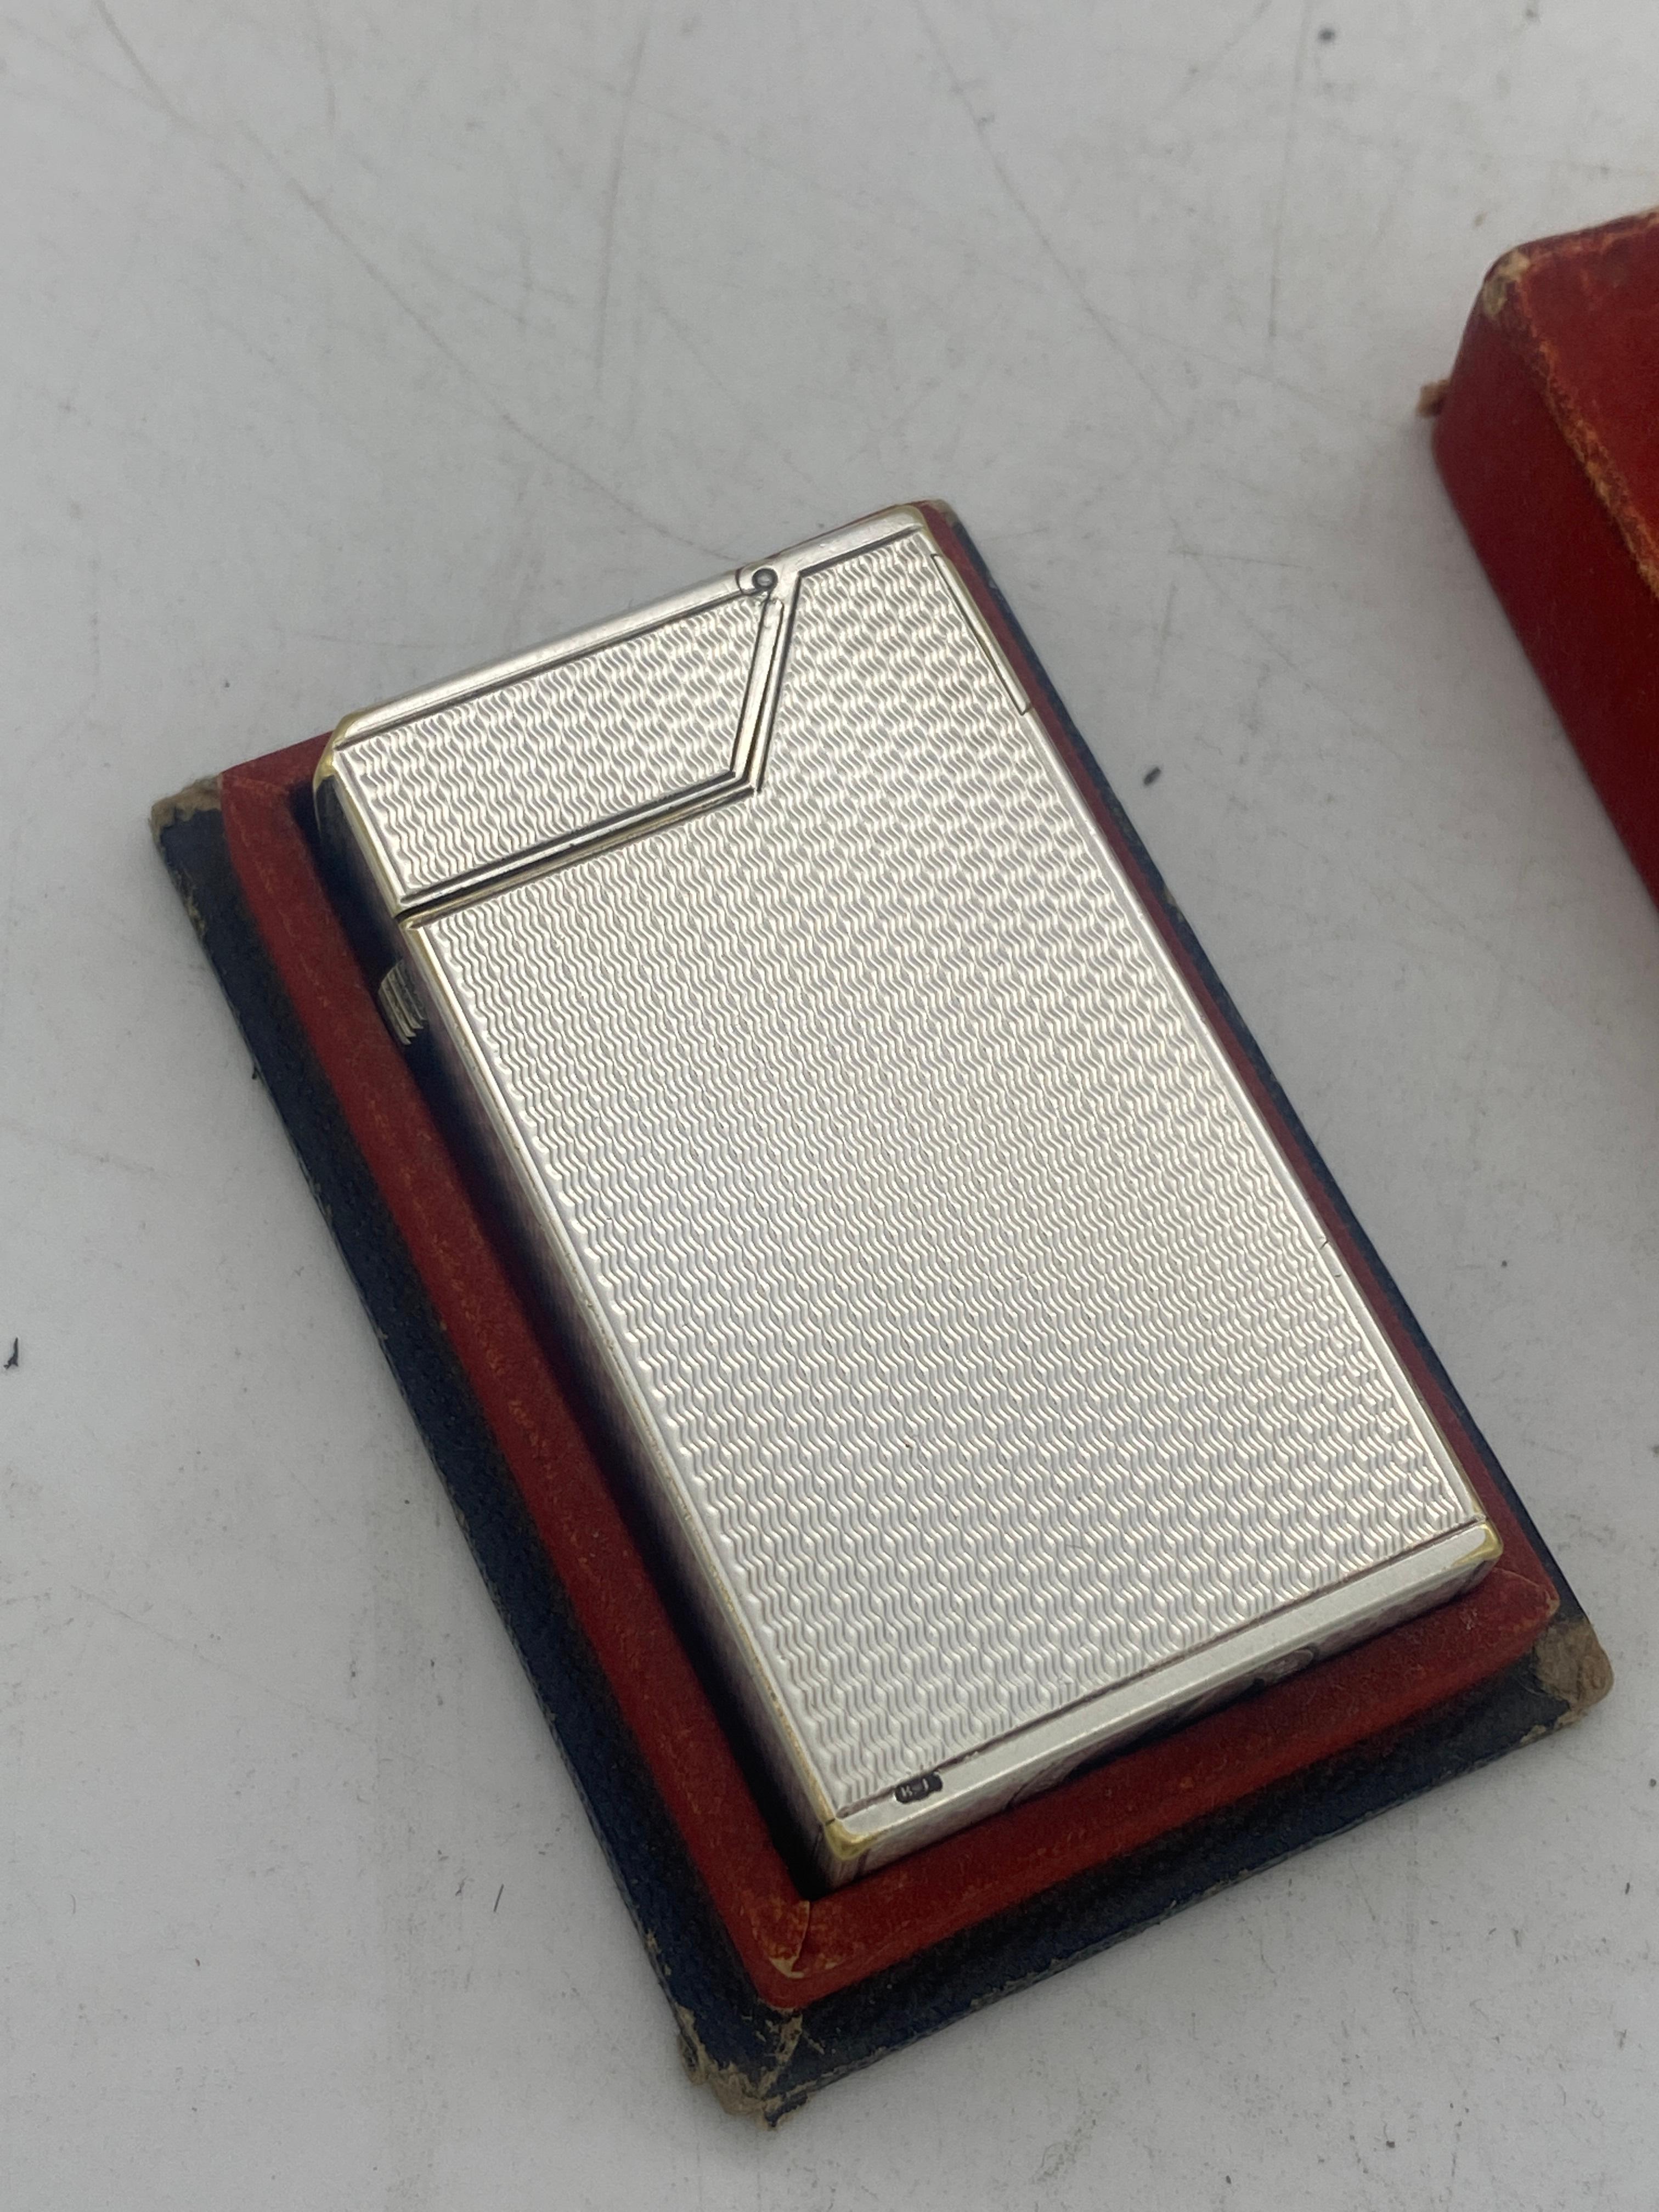 Antique Dunhill Broadboy halfcap sterling silver petrol lighter in the Barley pattern.

In really nice used condition and measures 1¾